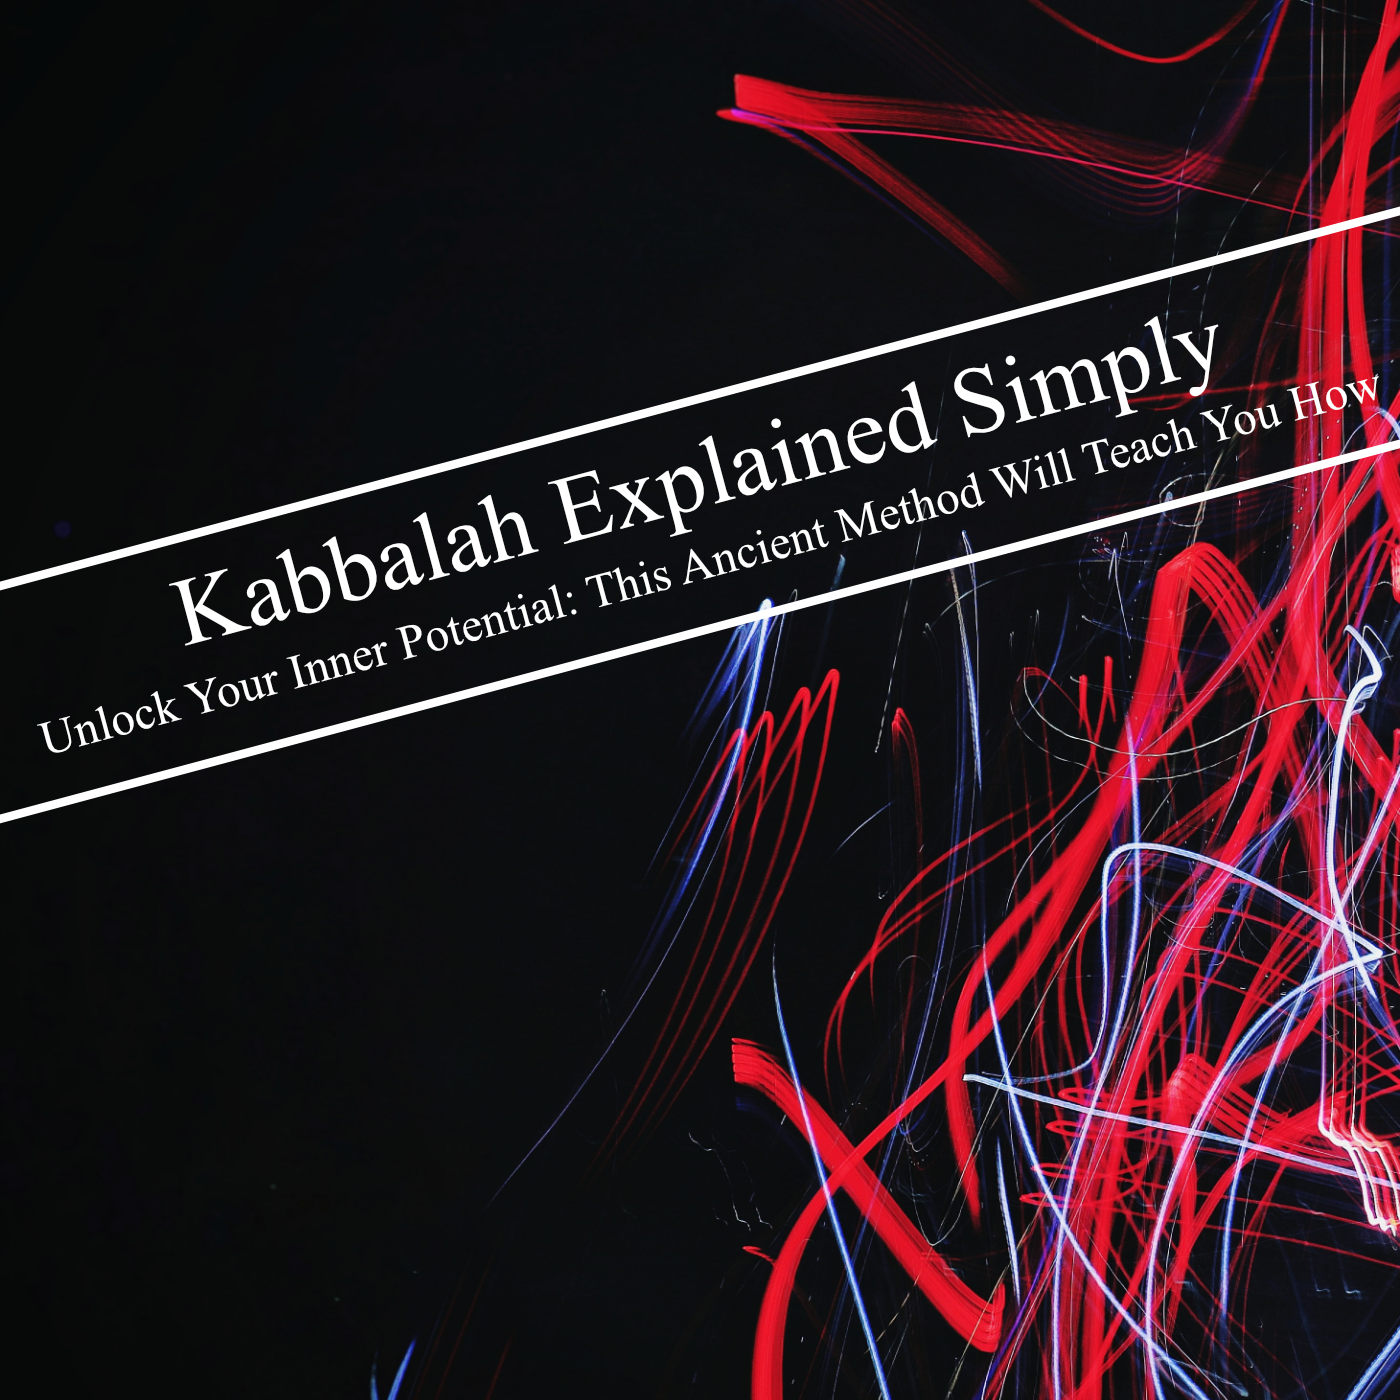 Kabbalah Explained Simply - Unlock Your Inner Potential: This Ancient Method Will Teach You How